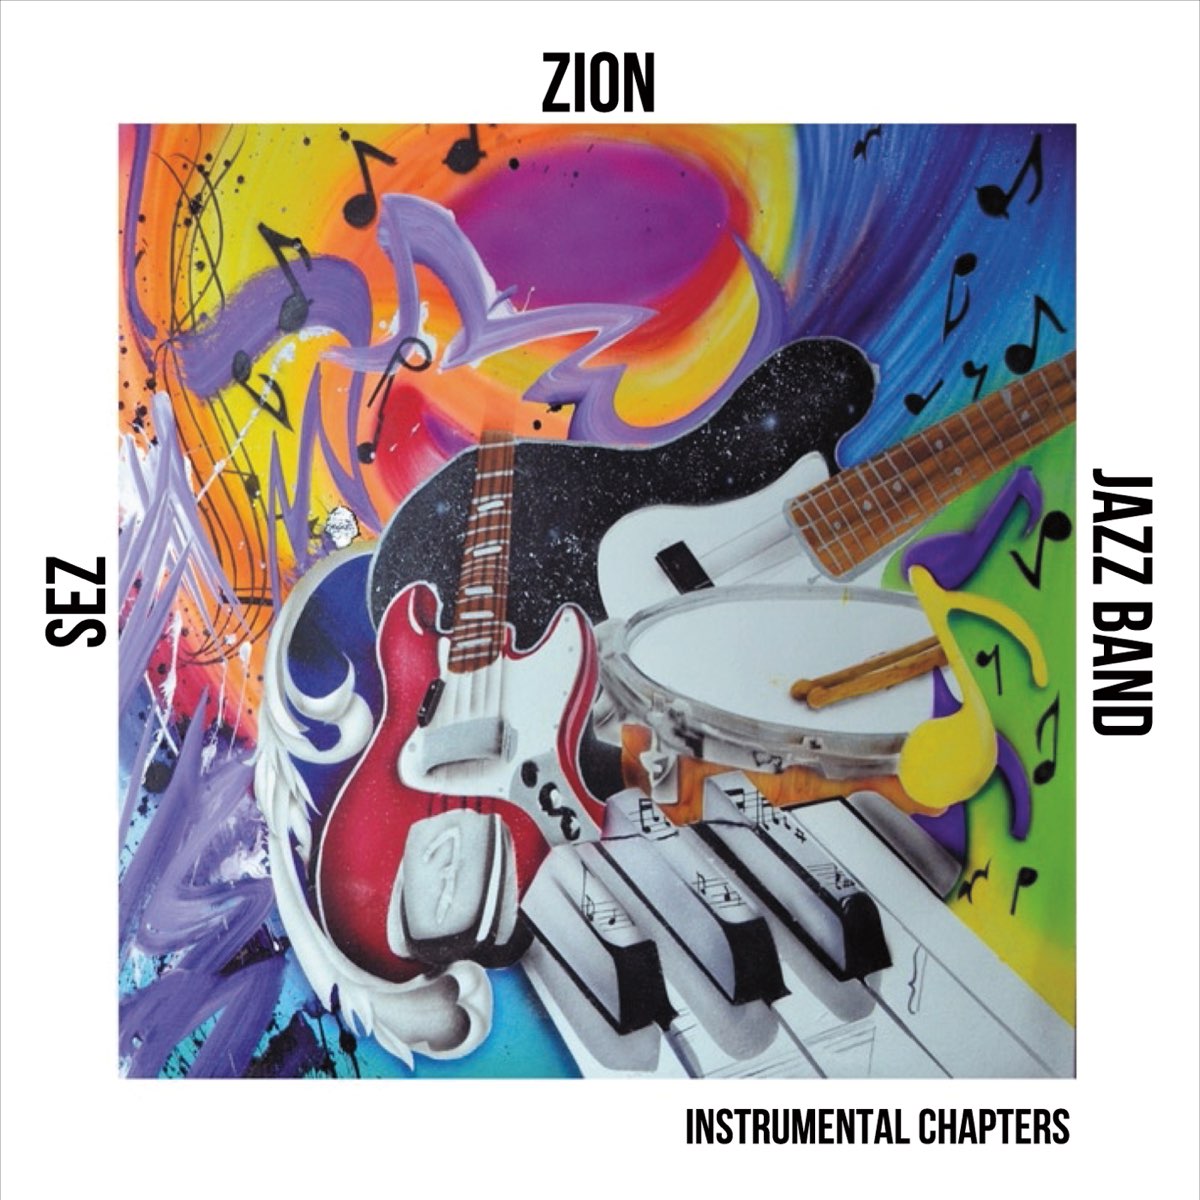 Instrumental Chapters by Sez Zion Jazz Band on Apple Music